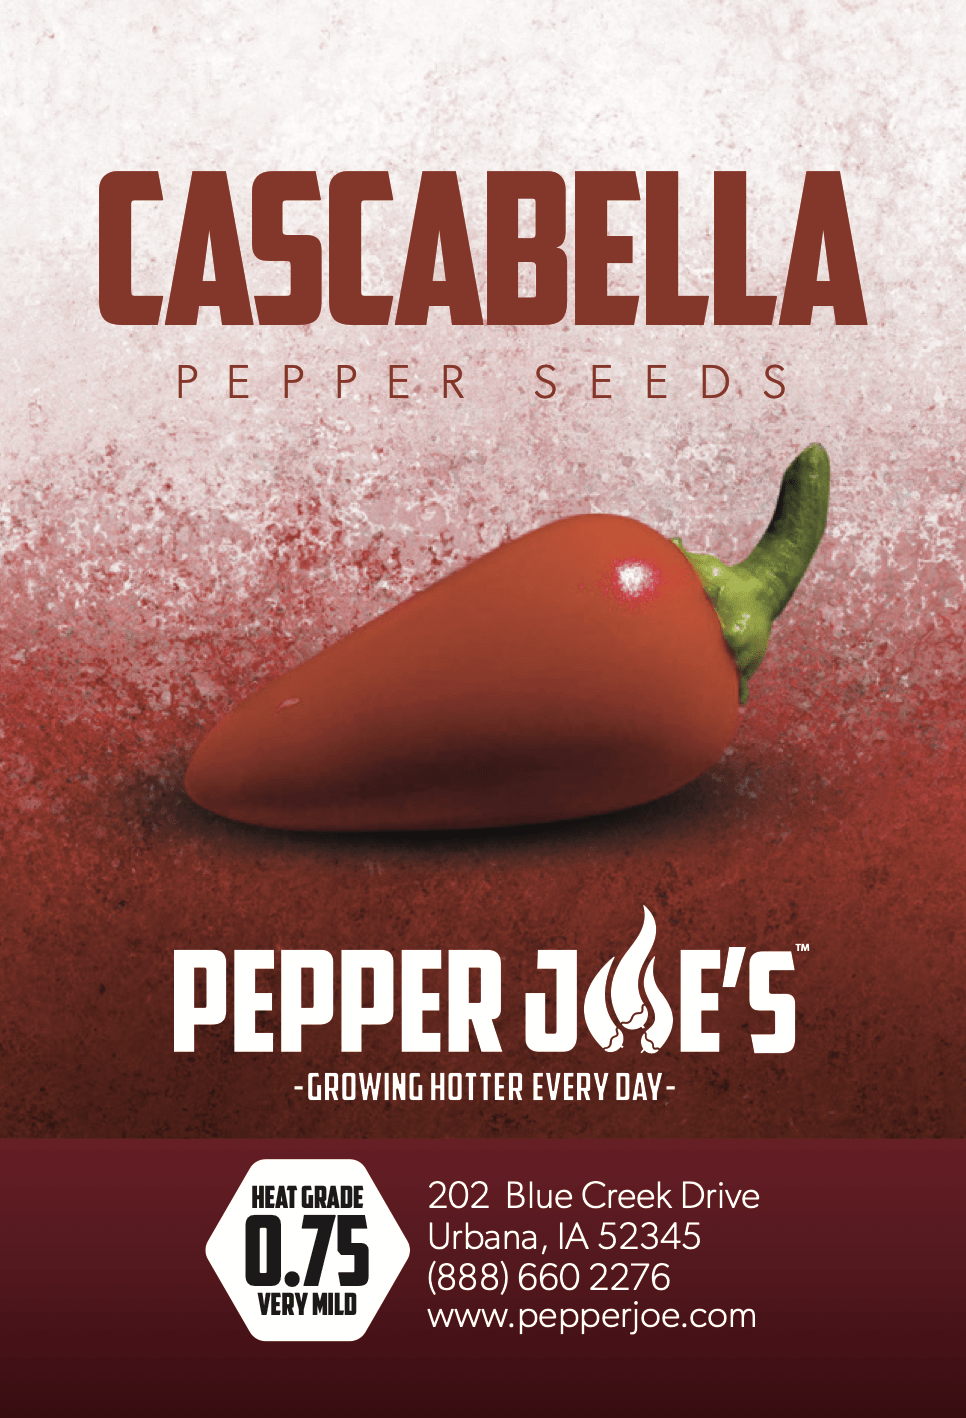 Pepper Joe's Yellow Cascabella peppers seed label